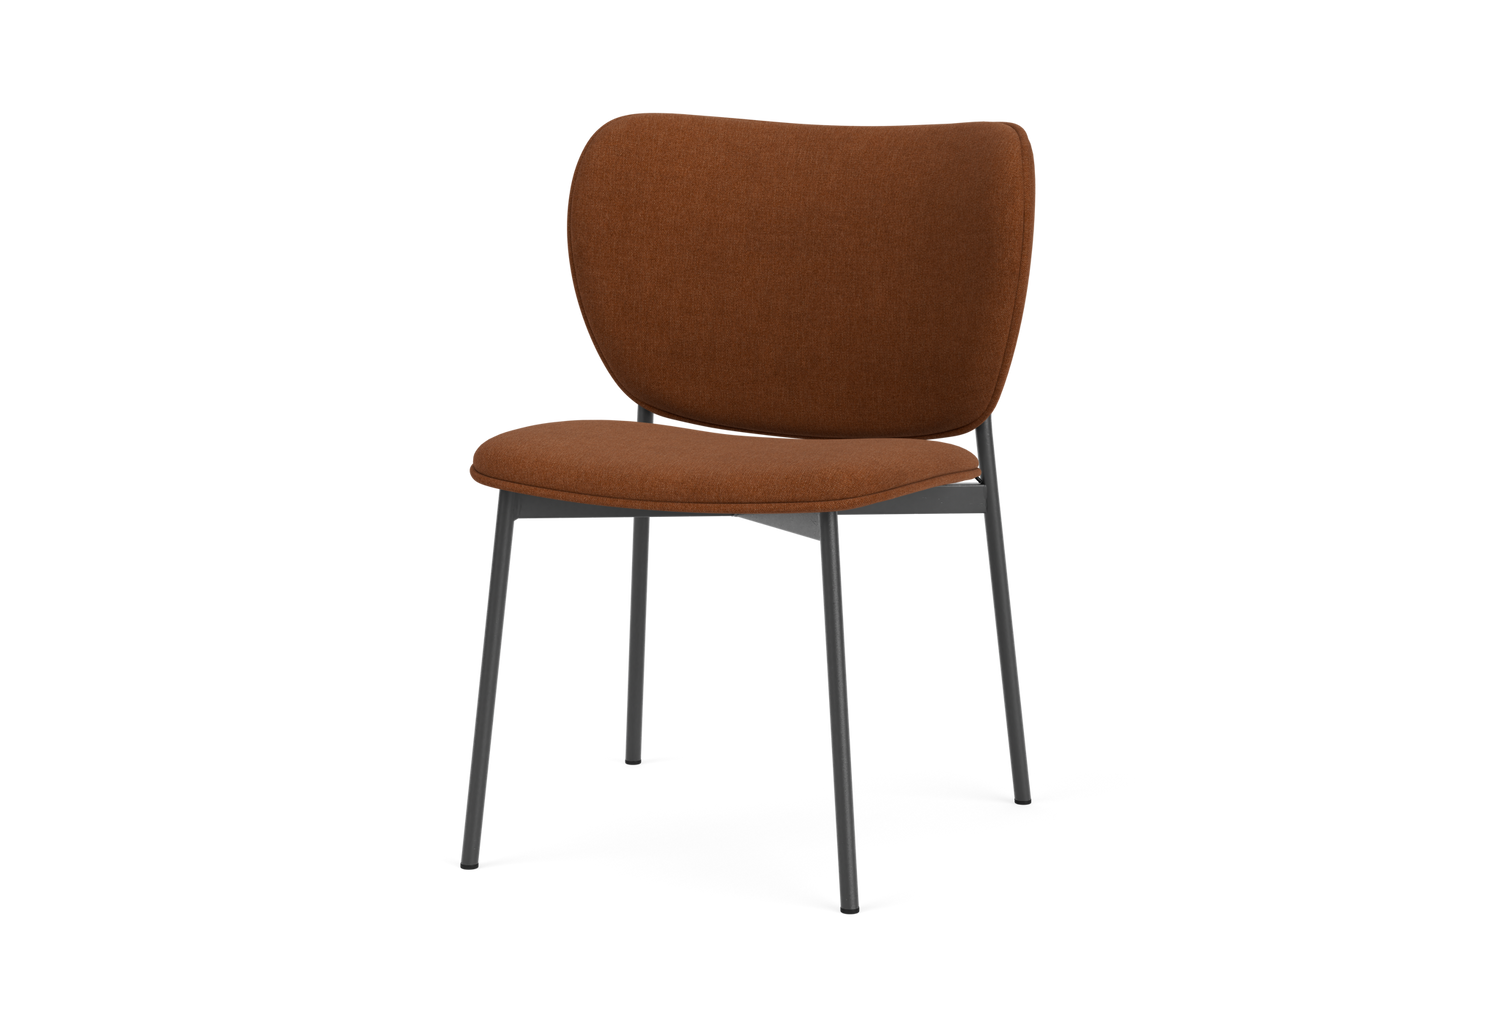 Dining chairs in stock-1 [TEST]